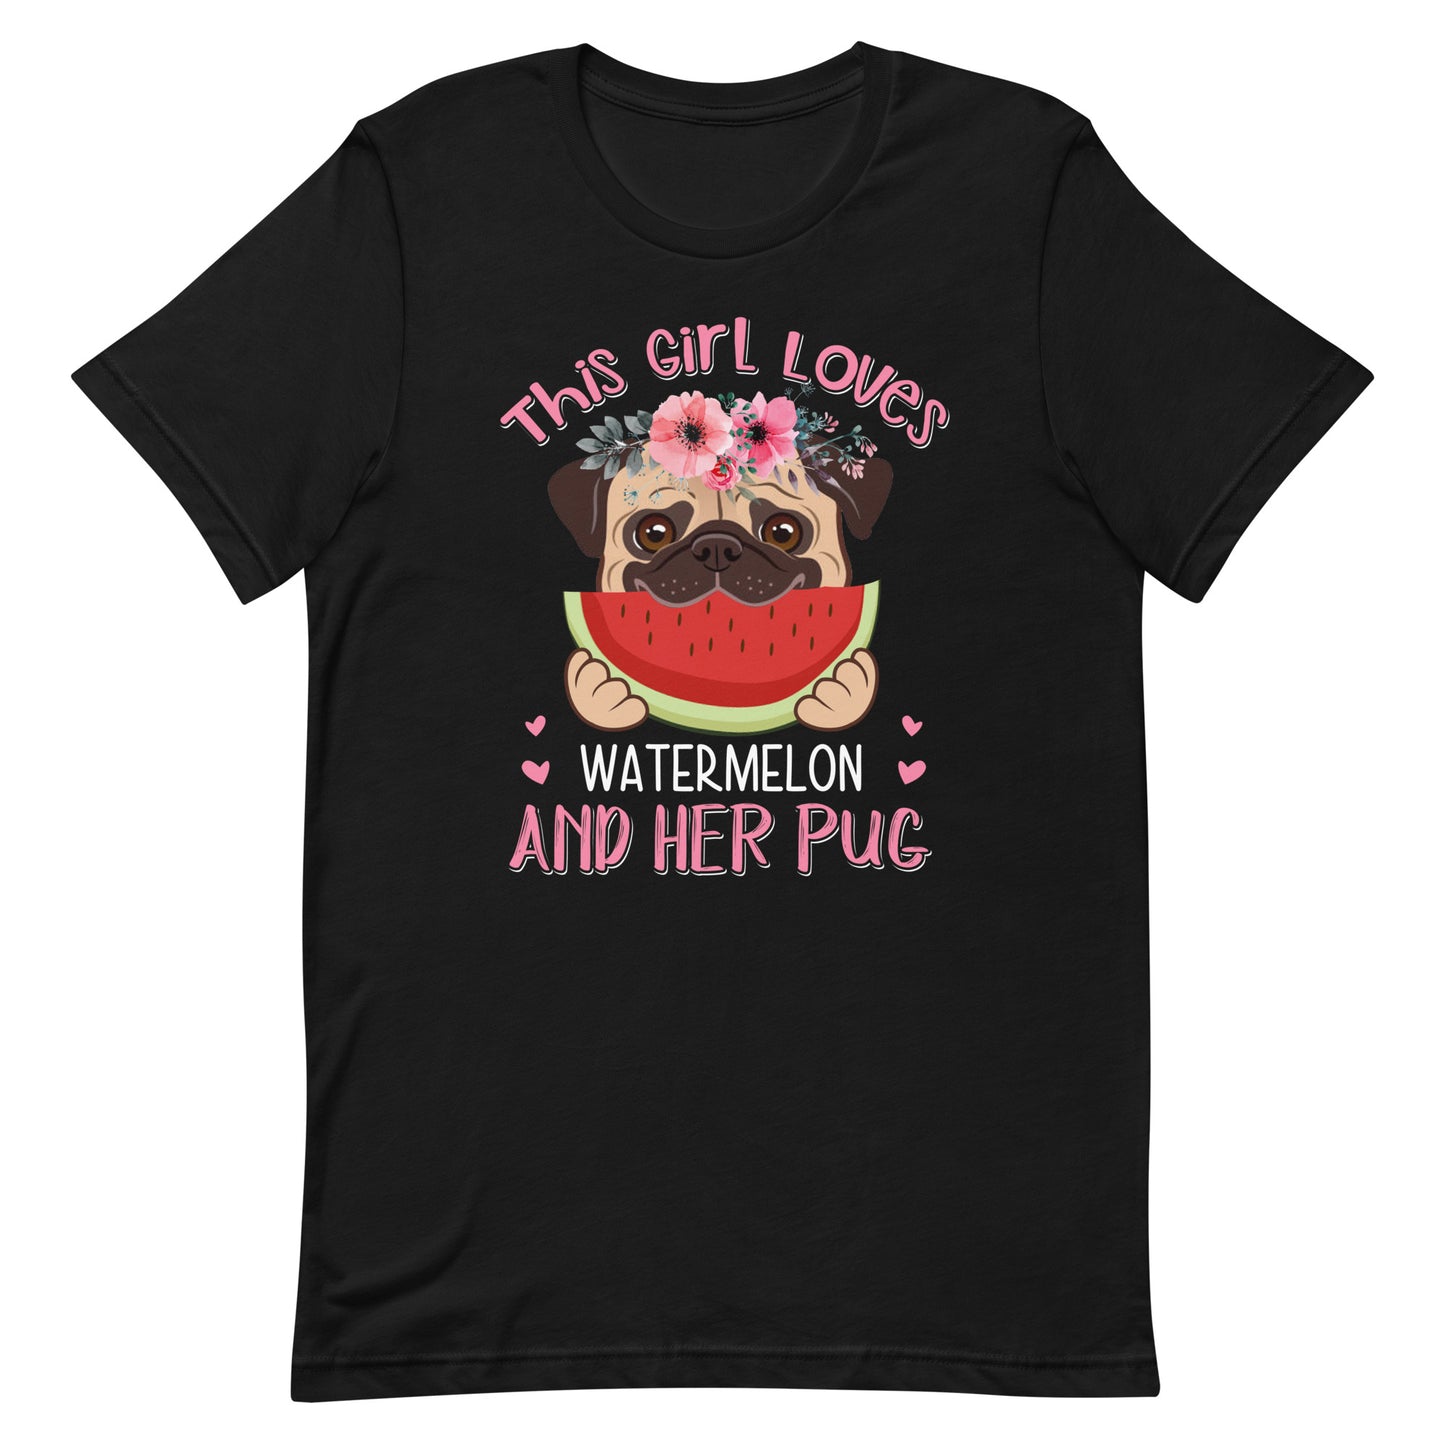 This Girl Loves Watermelon and Her Pug T-Shirt